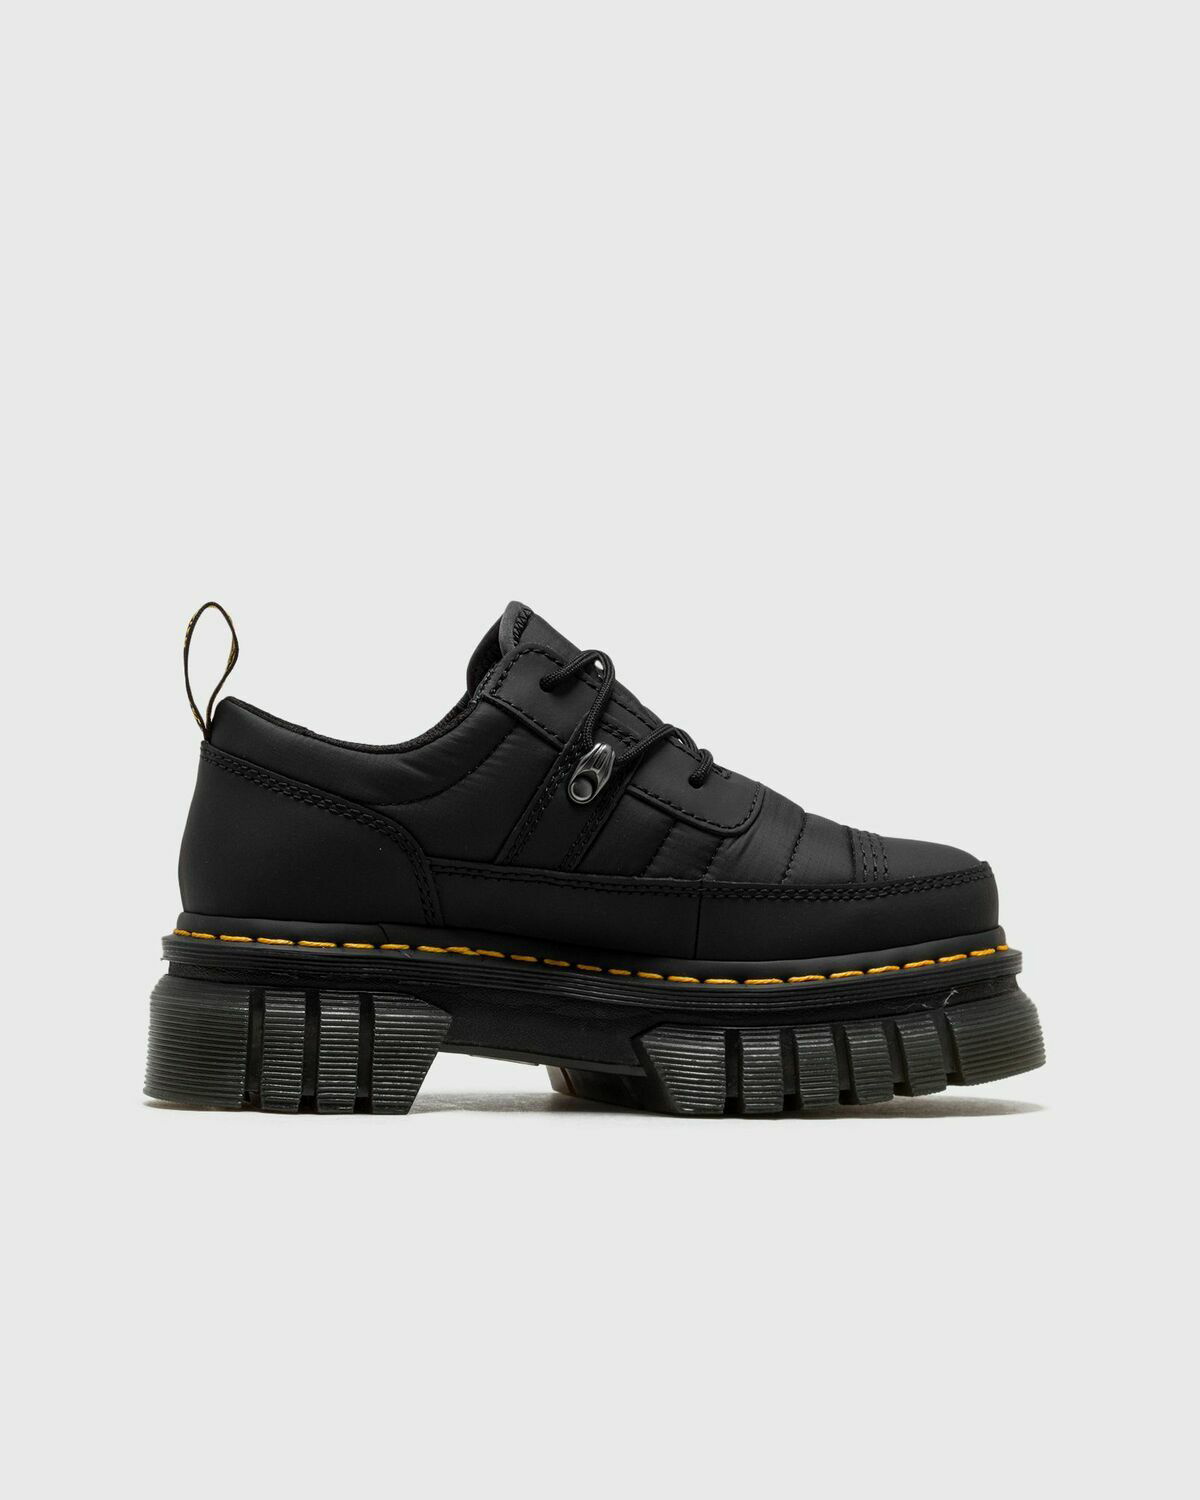 Dr.Martens Audrick 3i Shoe Qltd Black Rubberised Leather+Warm Quilted Black  - Womens - Boots